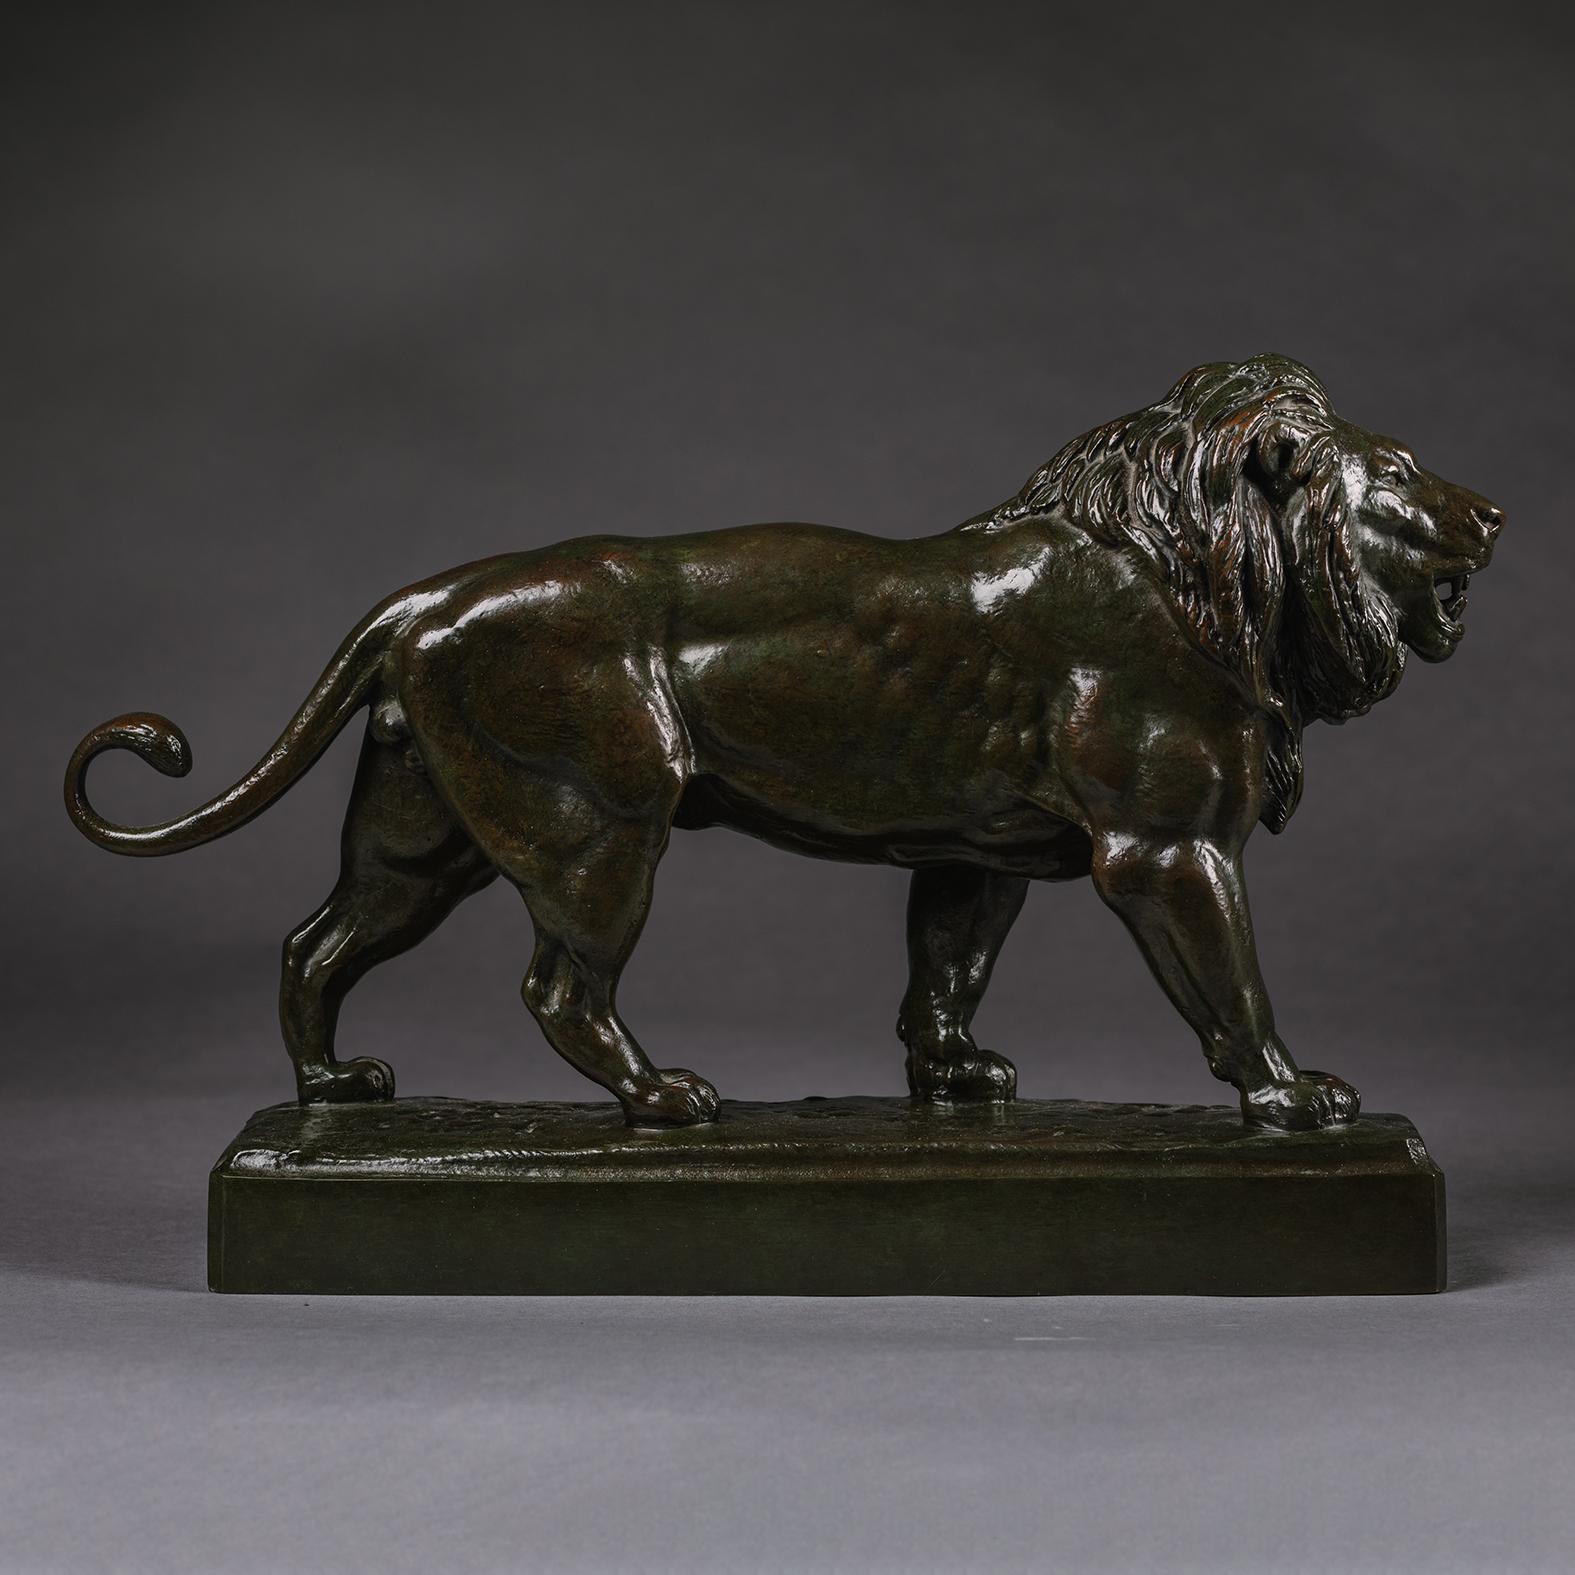 Antoine-Louis Barye (French, 1795-1875) 
'Lion marchant'

bronze with dark brown patina

signed 'BARYE'  on the base and with the foundry mark 'HB / C' to underside for Maison H. Brame.

France, Circa 1880.

Antoine-Louis Barye’s remarkably lifelike